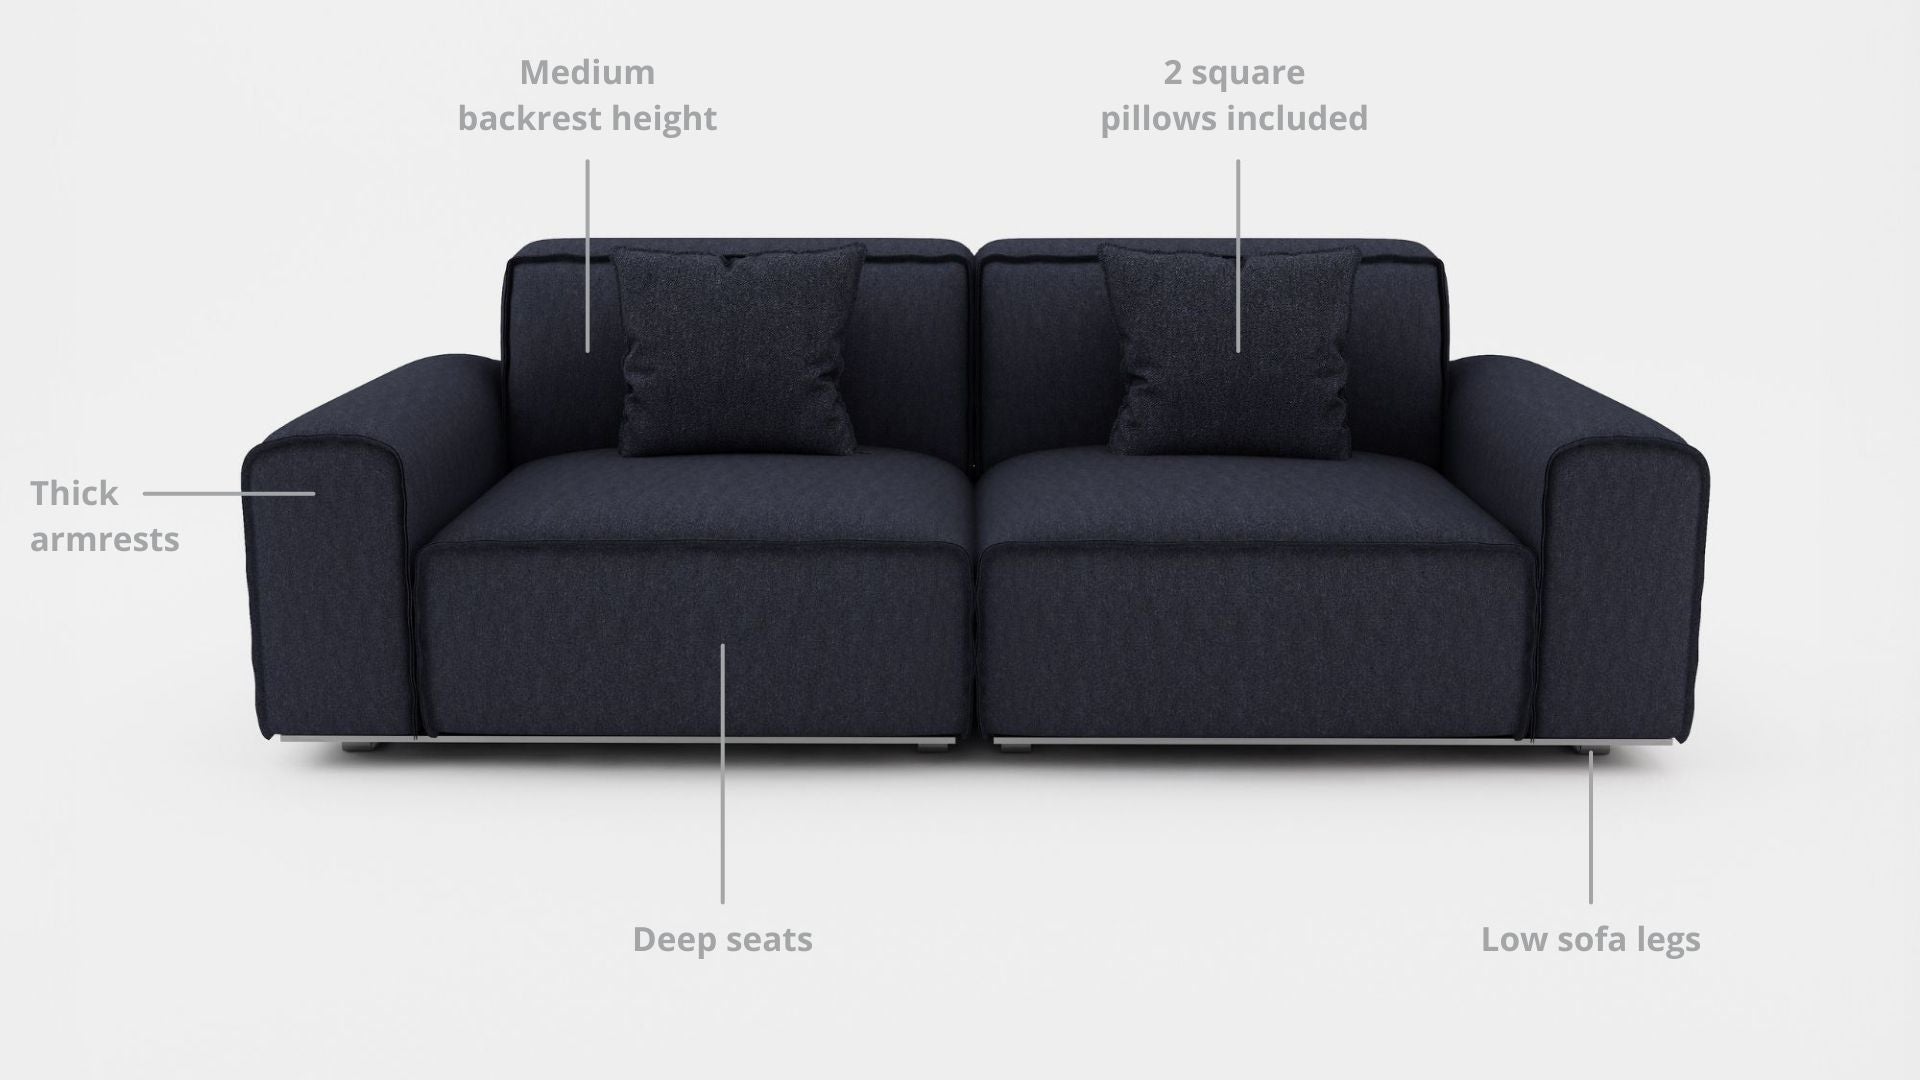 Key features such as armrest thickness, cushion height, seat depth and sofa leg height for Colby Fabric Sofa